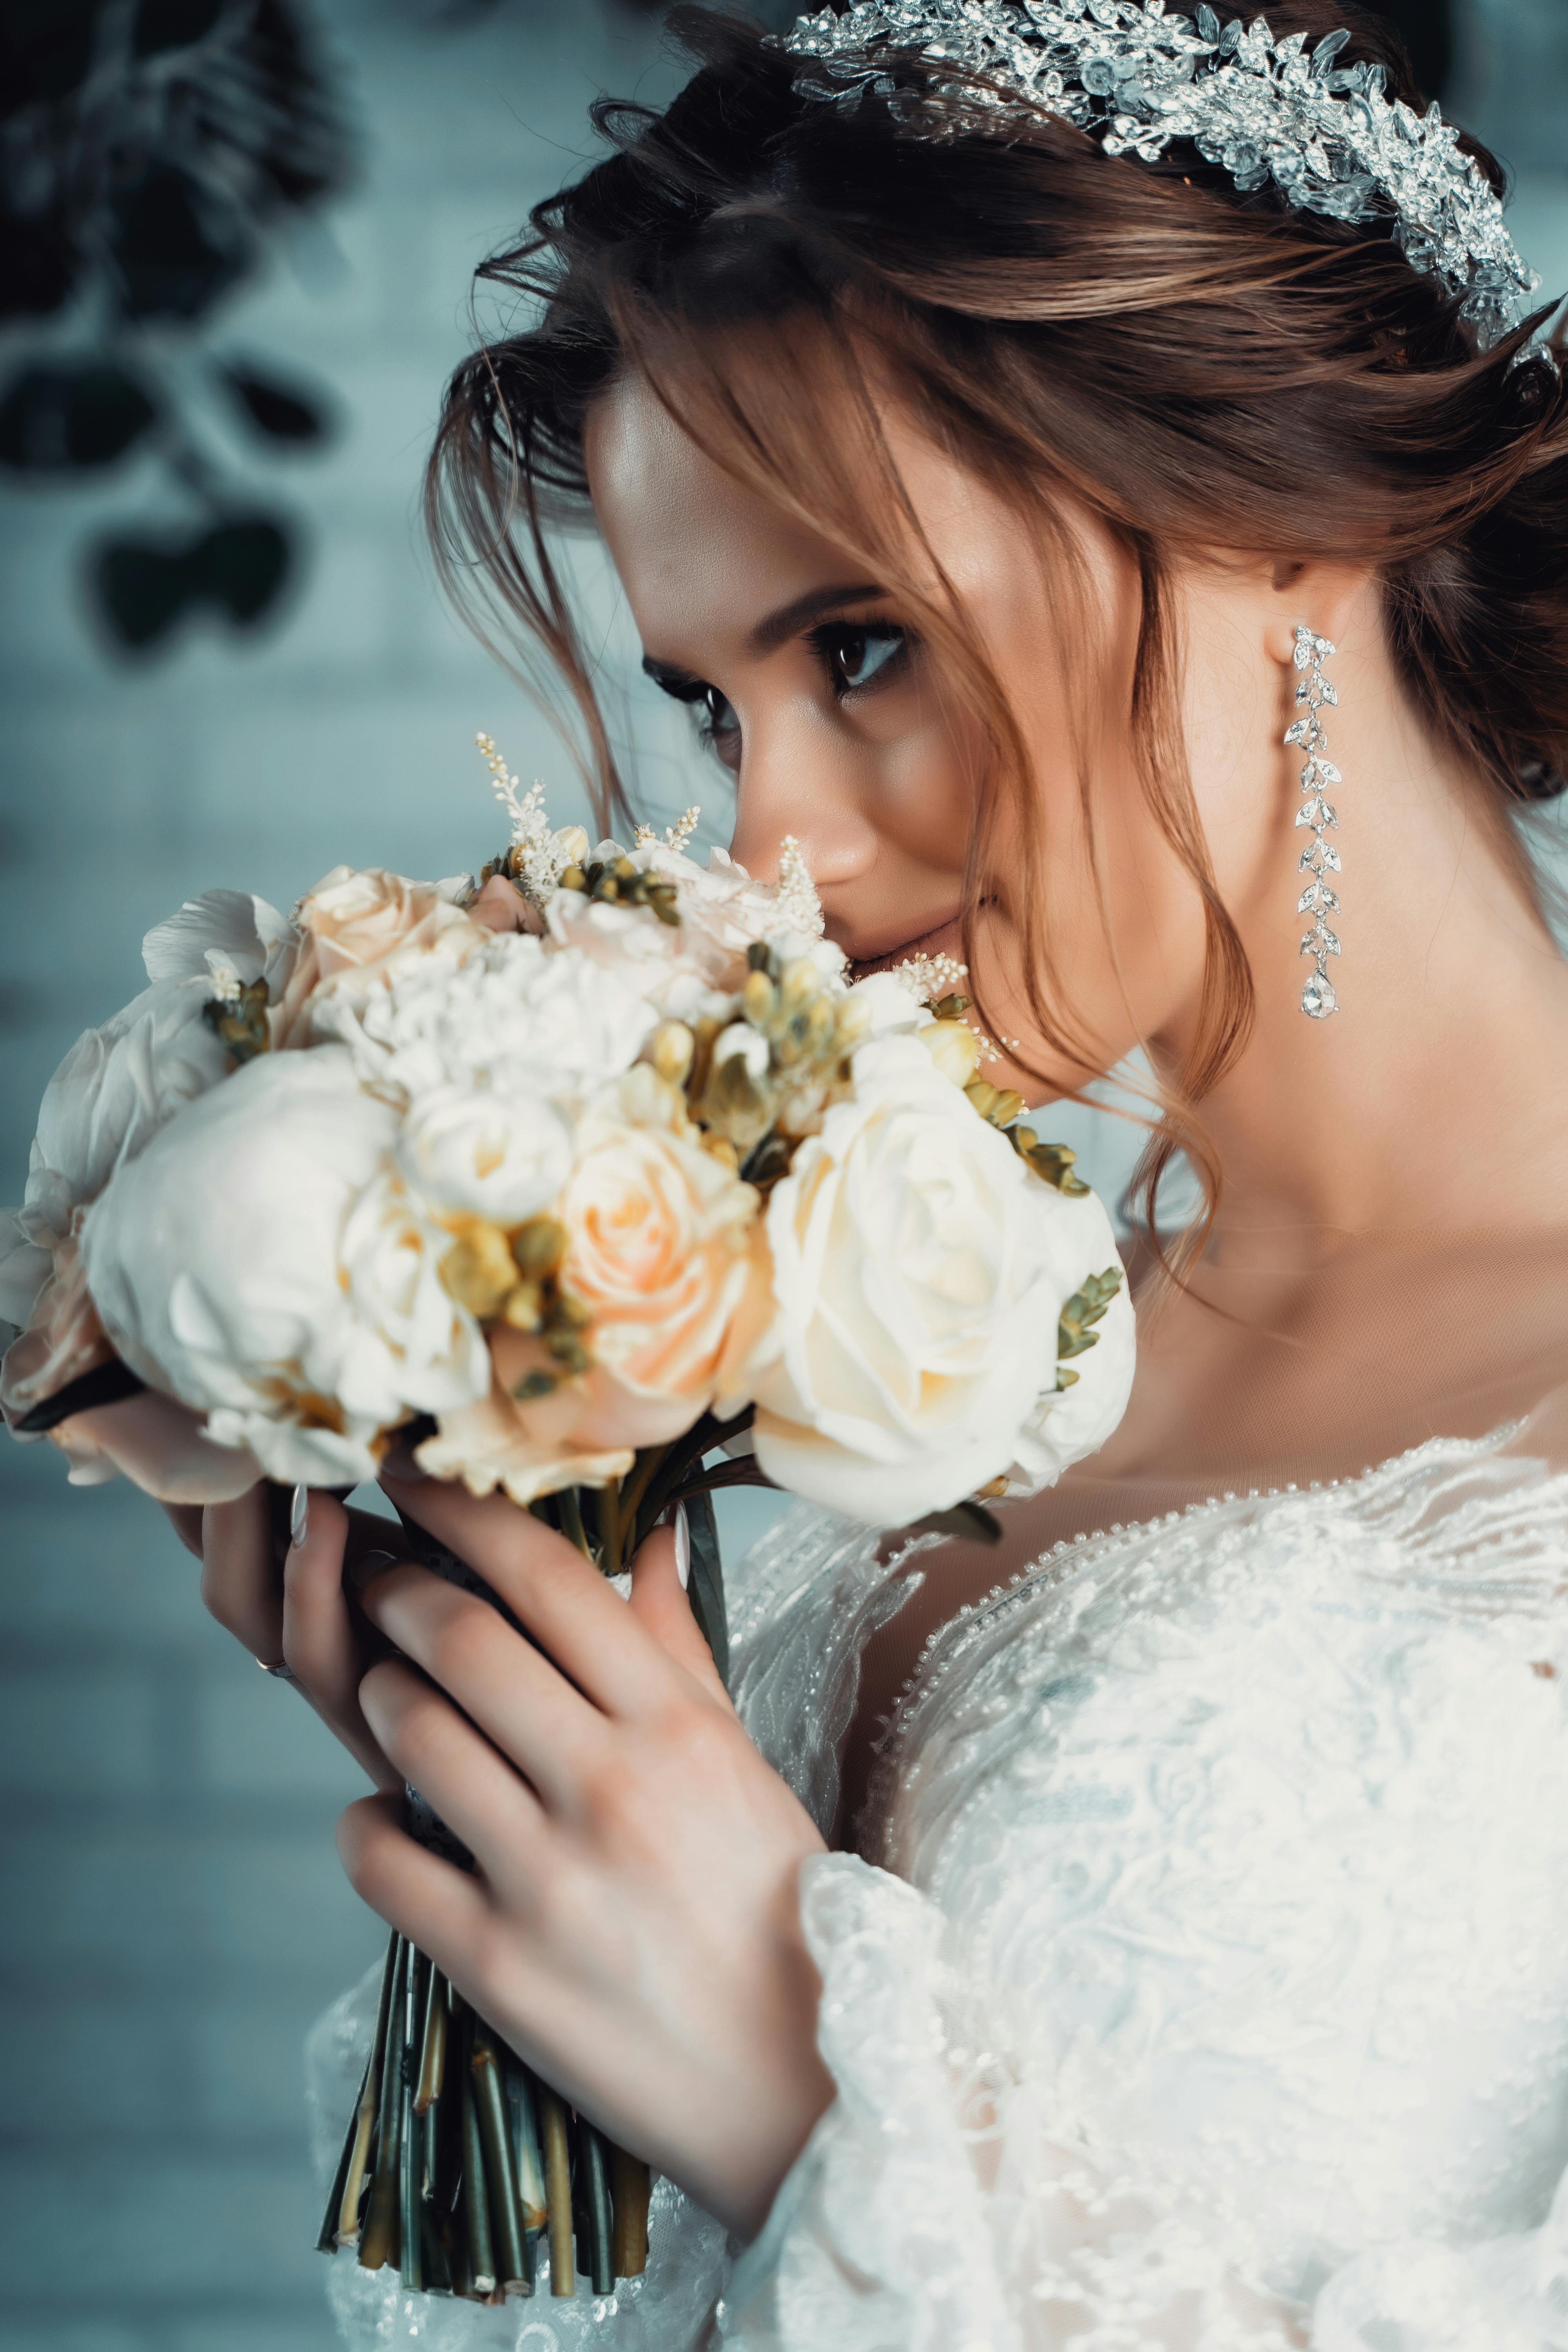 Wedding Day. Young Beautiful Bride with Hairstyle and Makeup Posing in White  Dress and Veil. Stock Photo - Image of love, brunette: 132918230